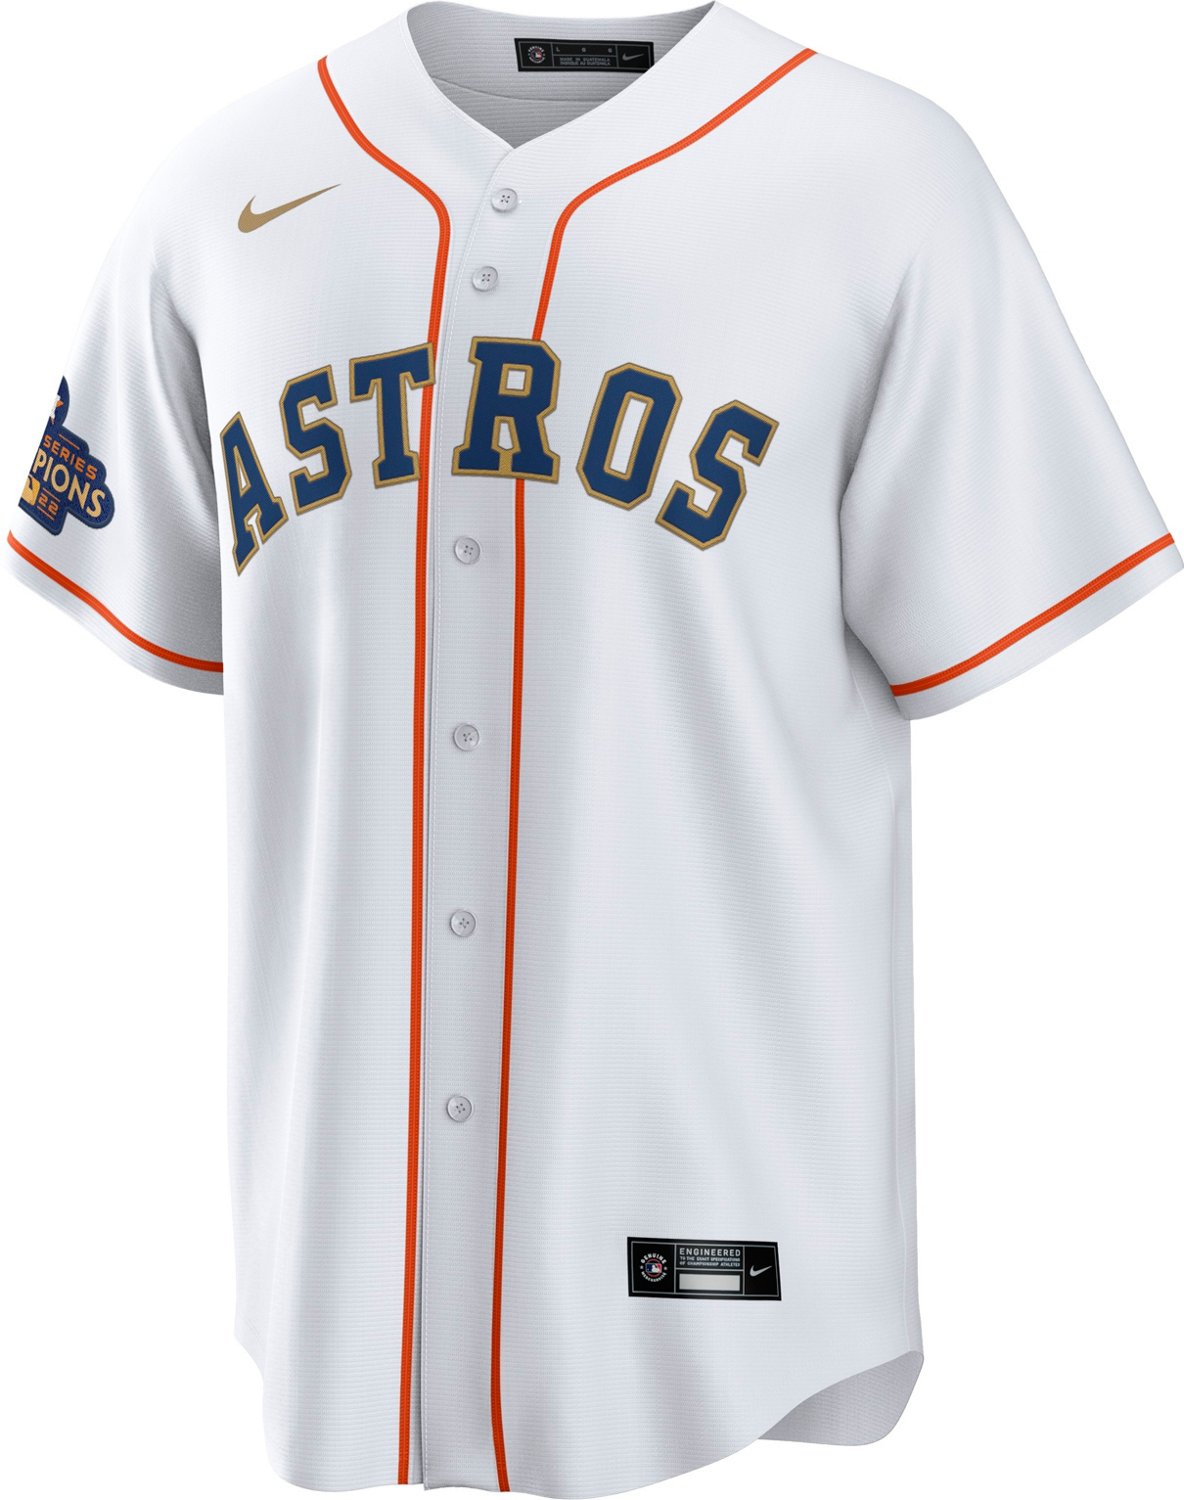 Academy to sell Astros Gold Rush uniforms, championship merchandise